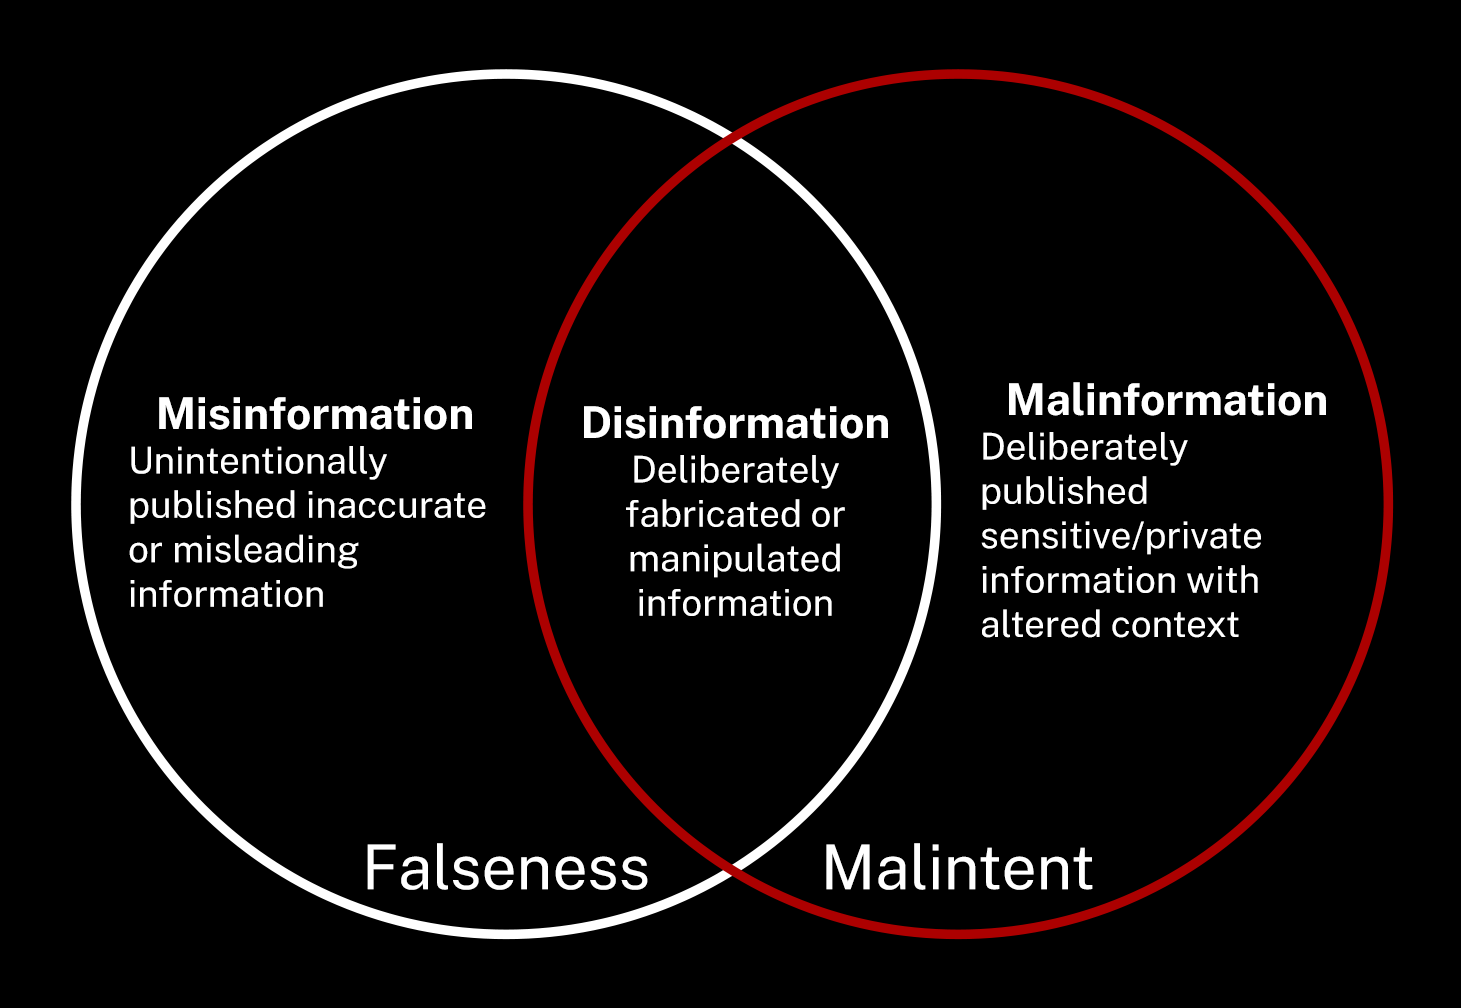 Mis-, Dis-, and Malinformation Differences